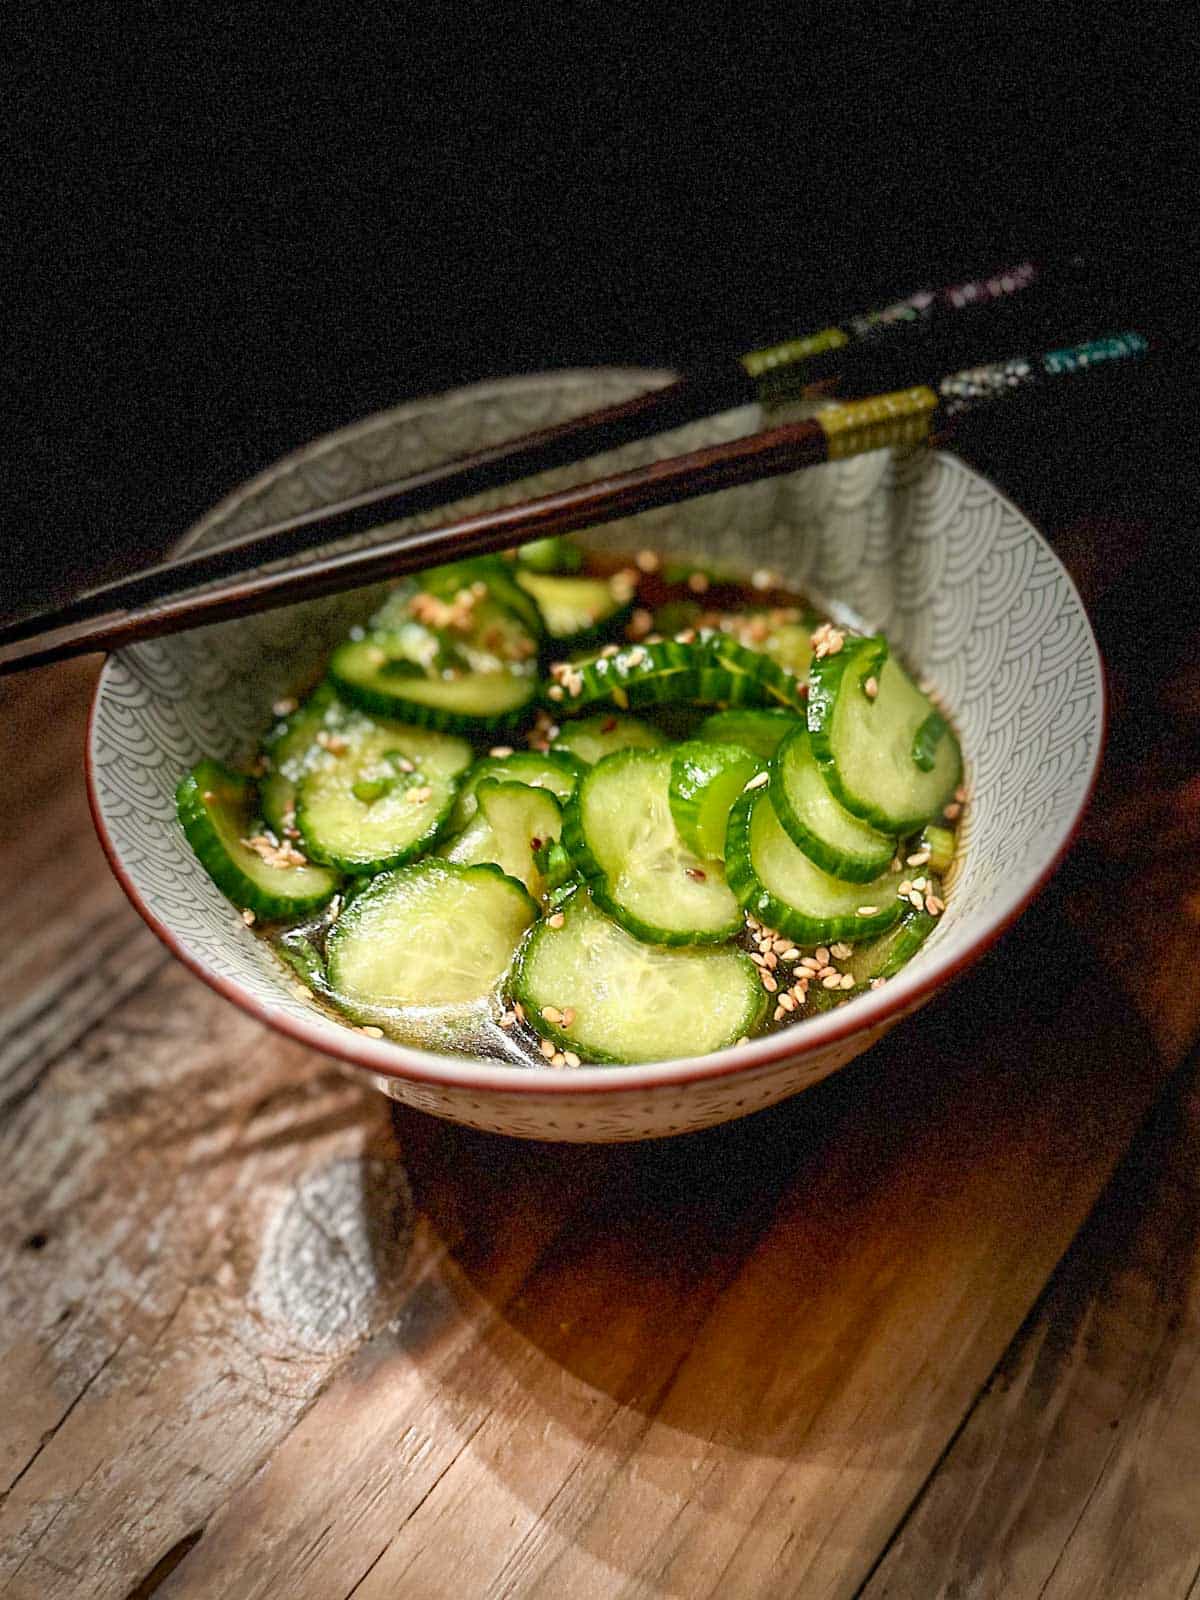 Pickled slices of cucumber garnished with sesame seeds and green onions in a small patterned bowl with chopsticks resting on the bowl and the bowl is on a wooden board.